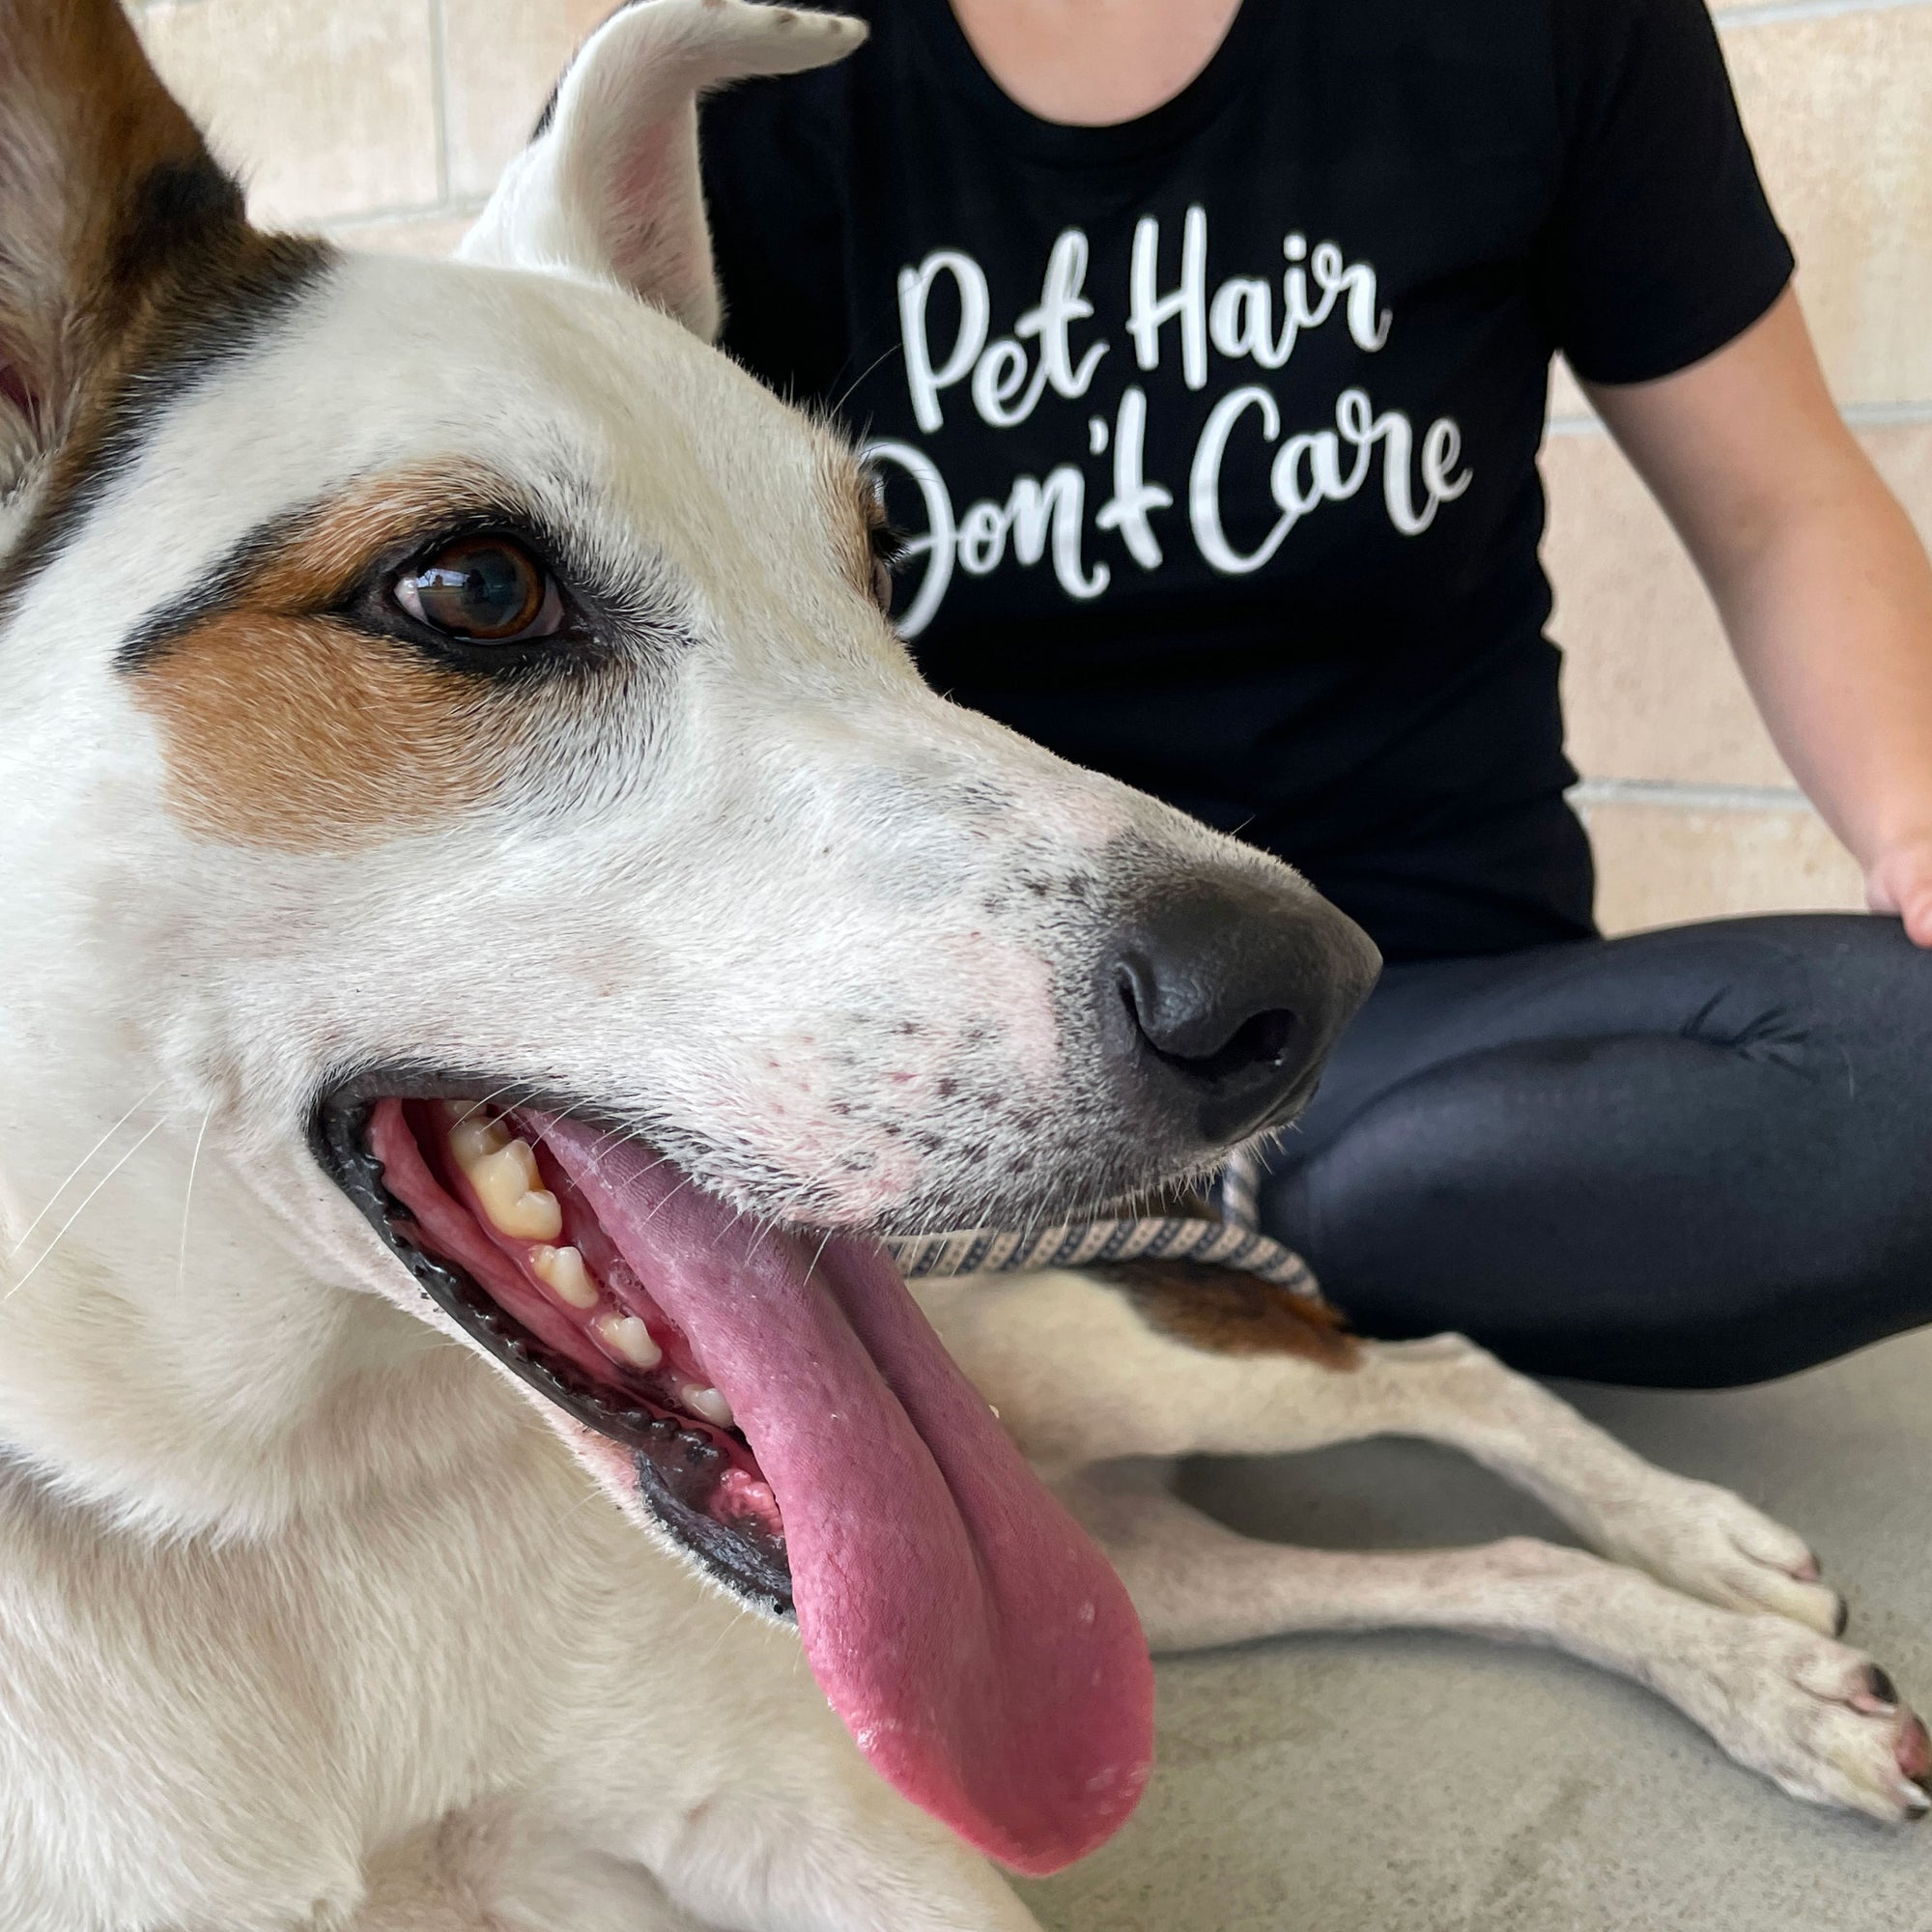 Why do people wear t-shirts about their dog?